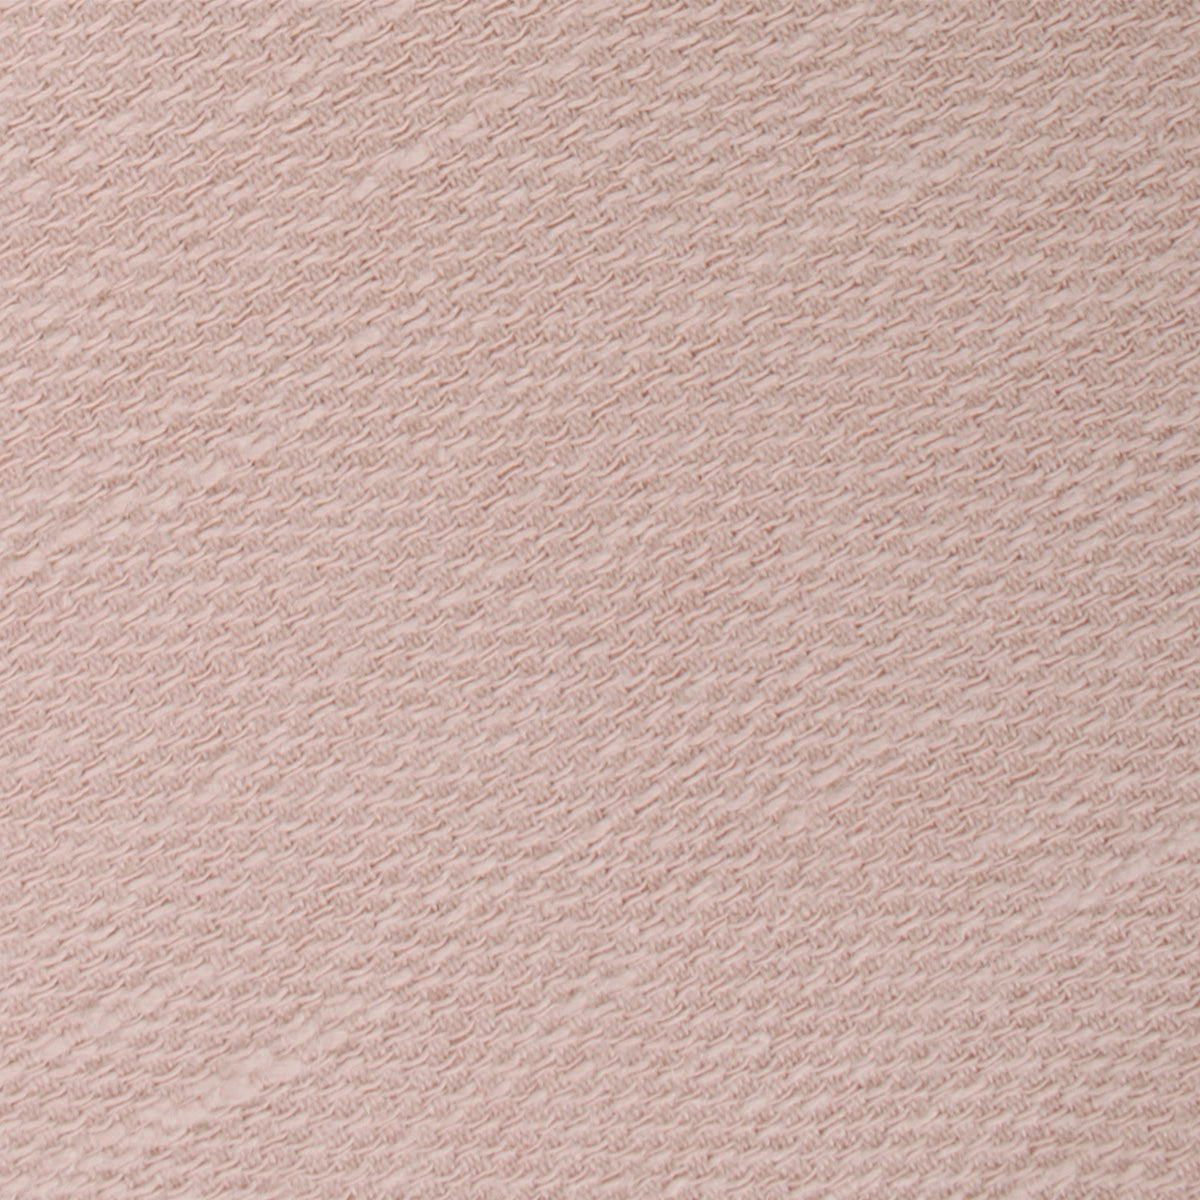 Dusty Beige Pink Linen Pocket Square Fabric